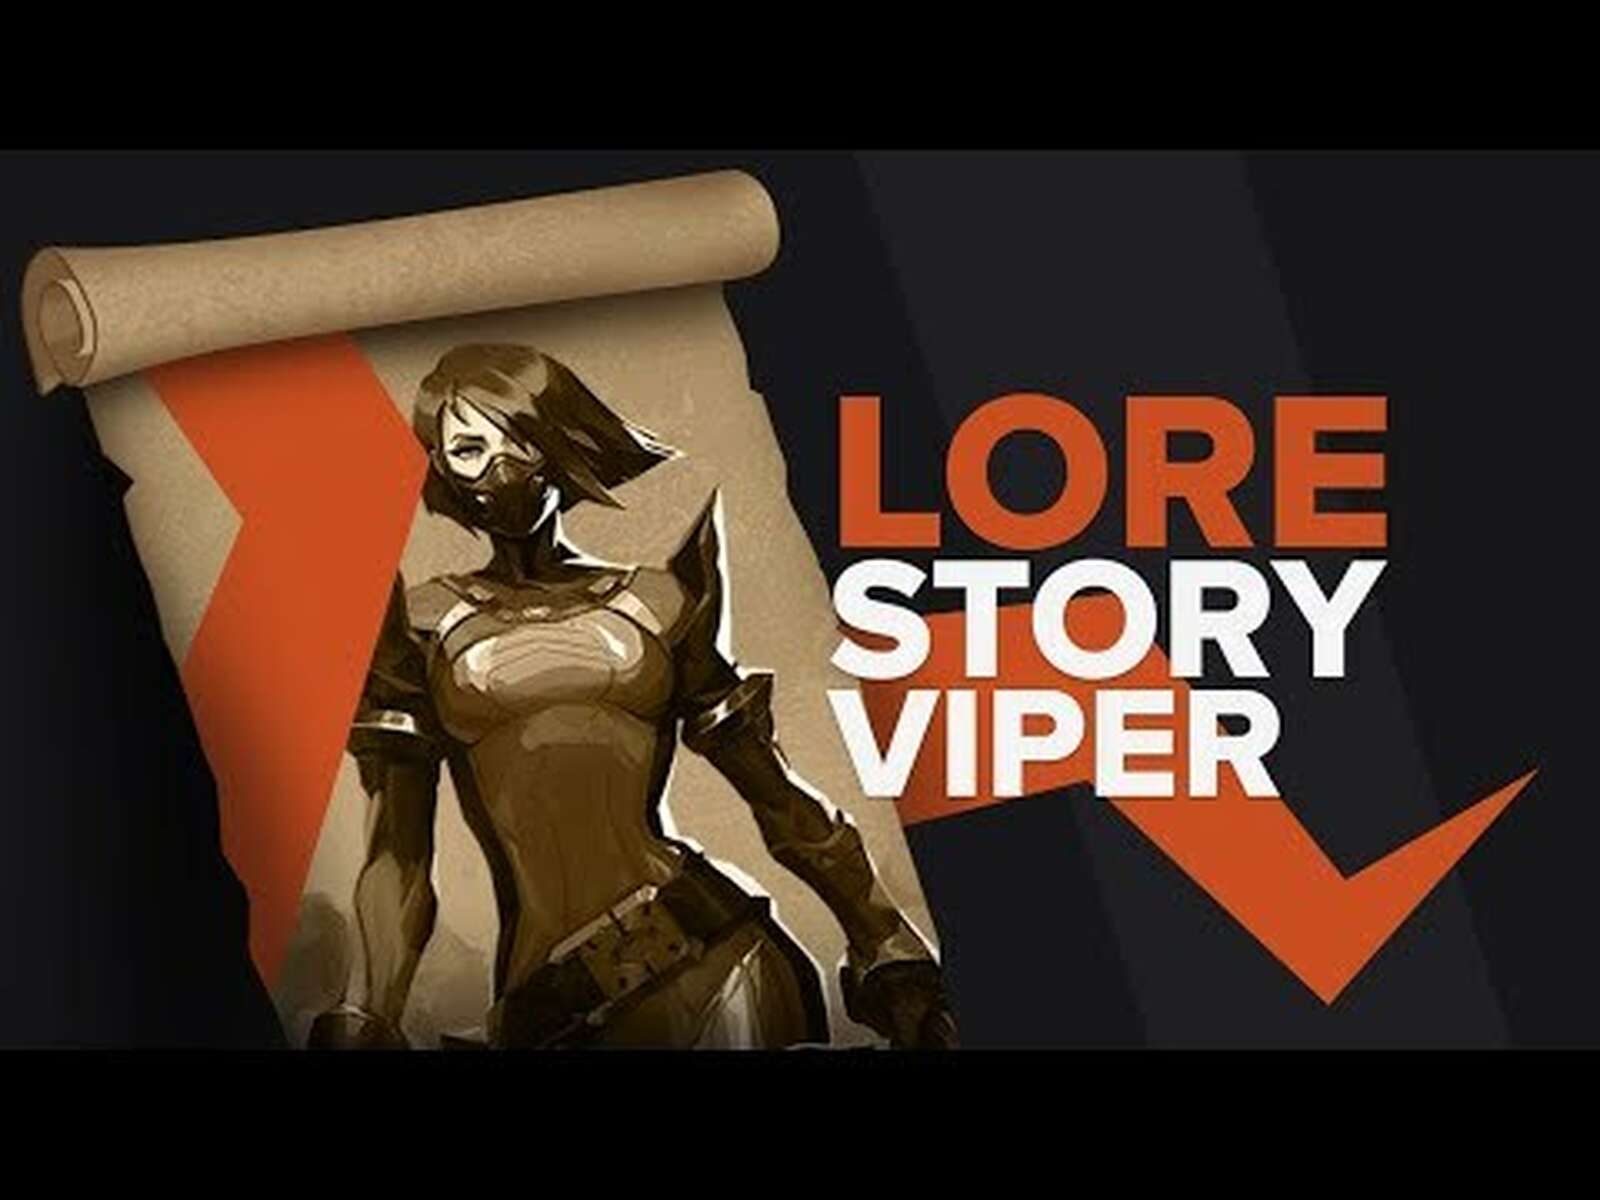 Is Viper EVIL? Viper&#39;s TRAGIC Lore Story Explained | What we KNOW so far